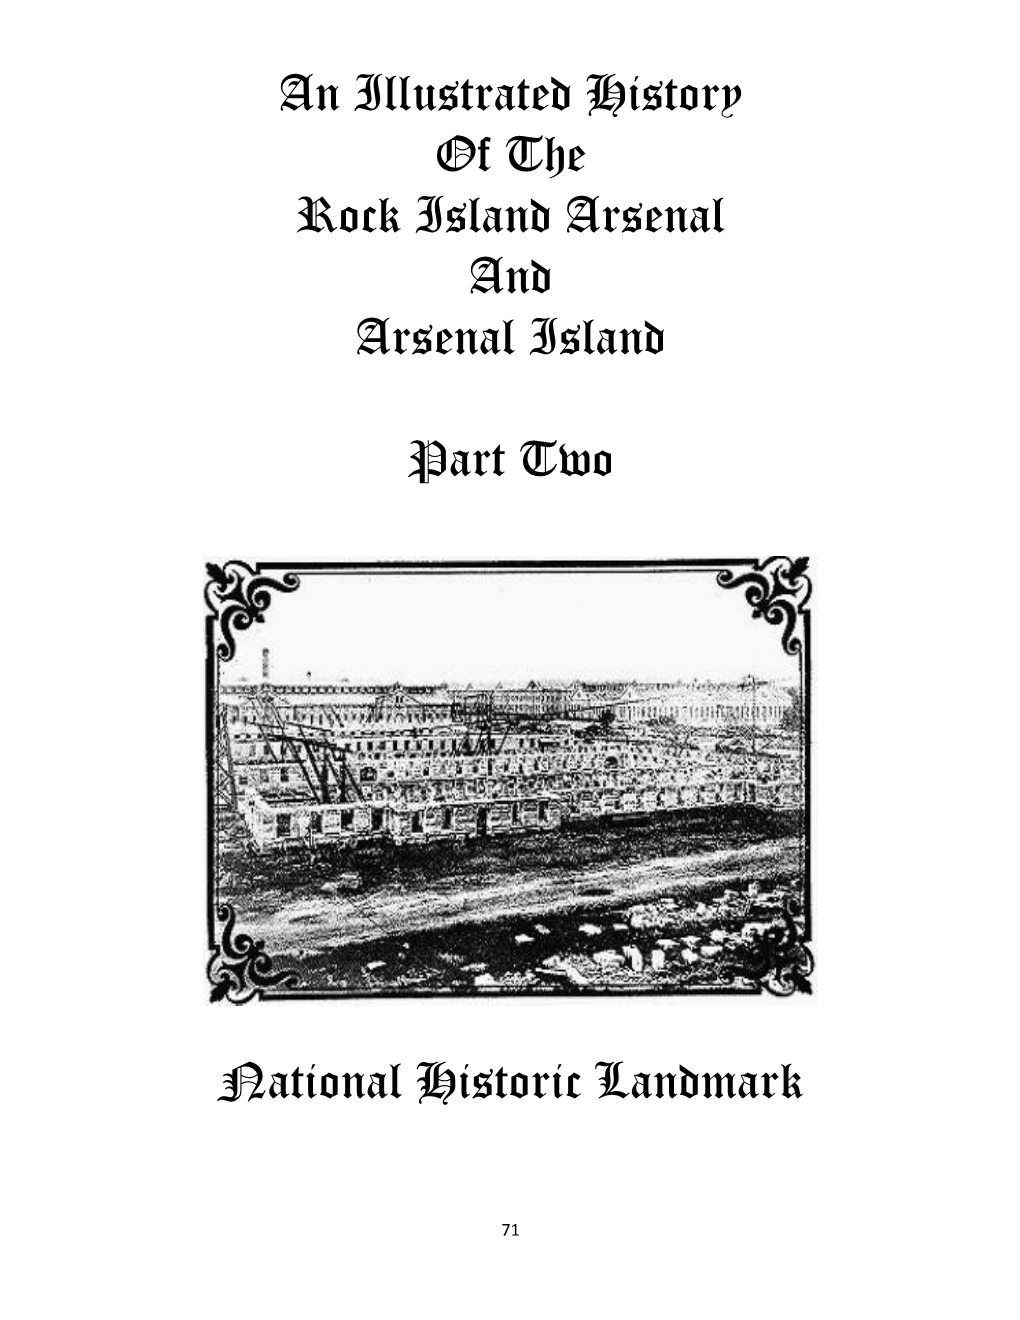 An Illustrated History of the Rock Island Arsenal and Arsenal Island